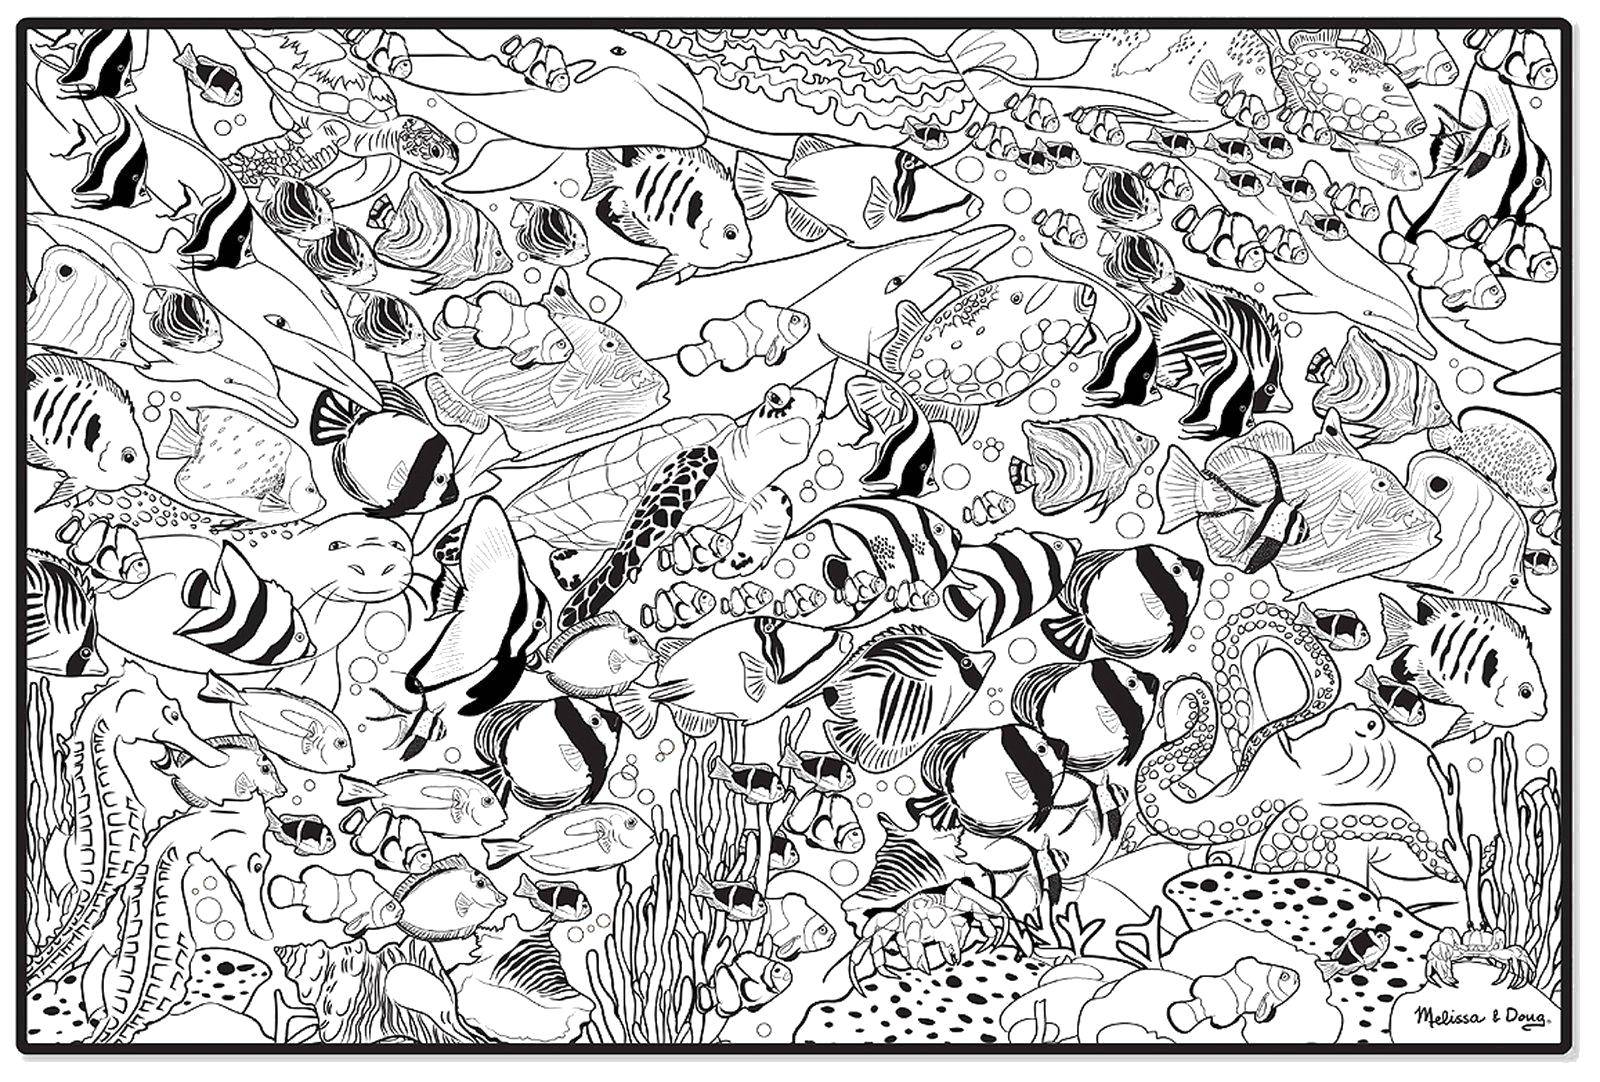 Coloring Stormy sea life. Category Marine animals. Tags:  Underwater world.